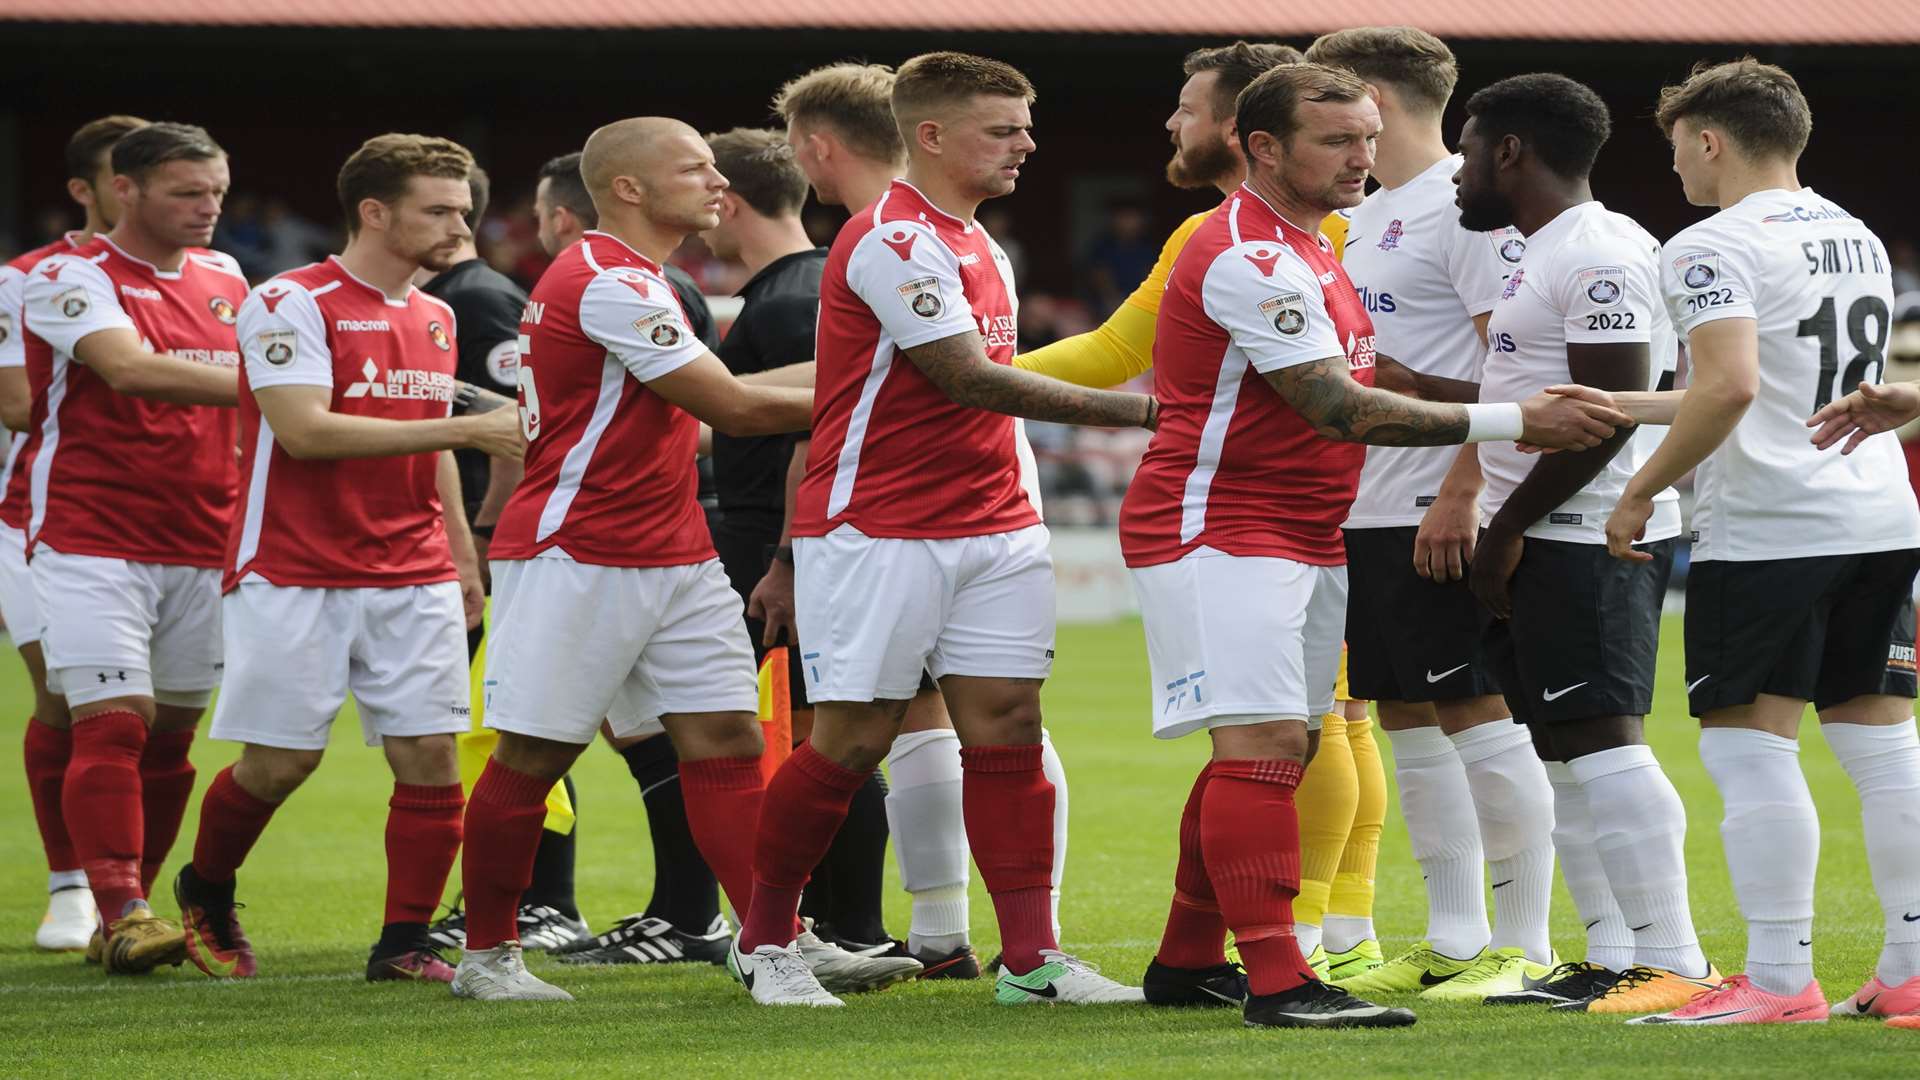 Danny Kedwell leads the pre-match handshakes. Picture: Andy Payton